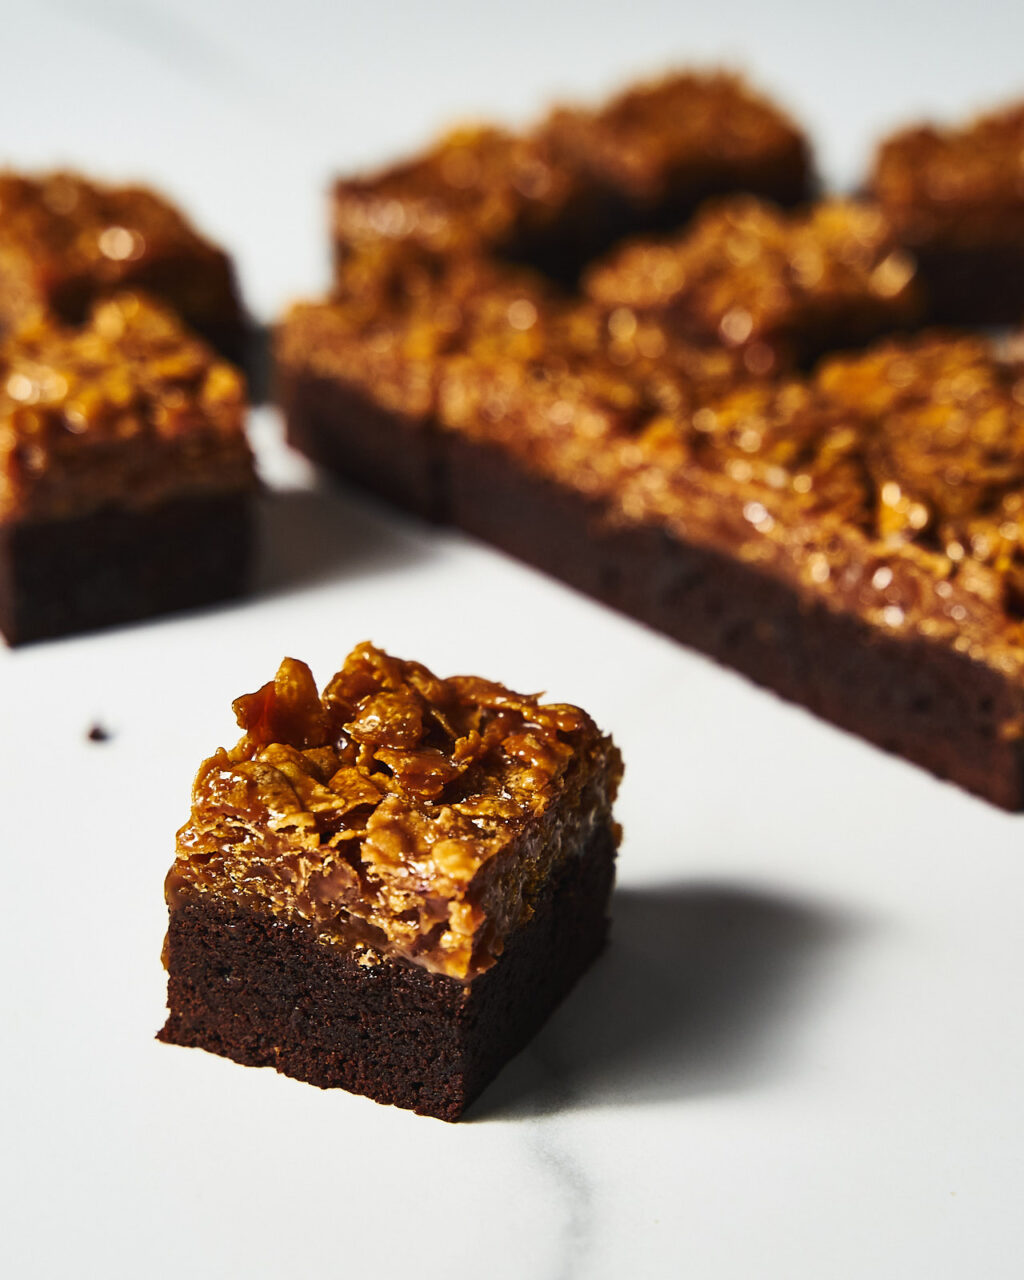 A slice of Brownie with crunchy cornflakes in salted caramel